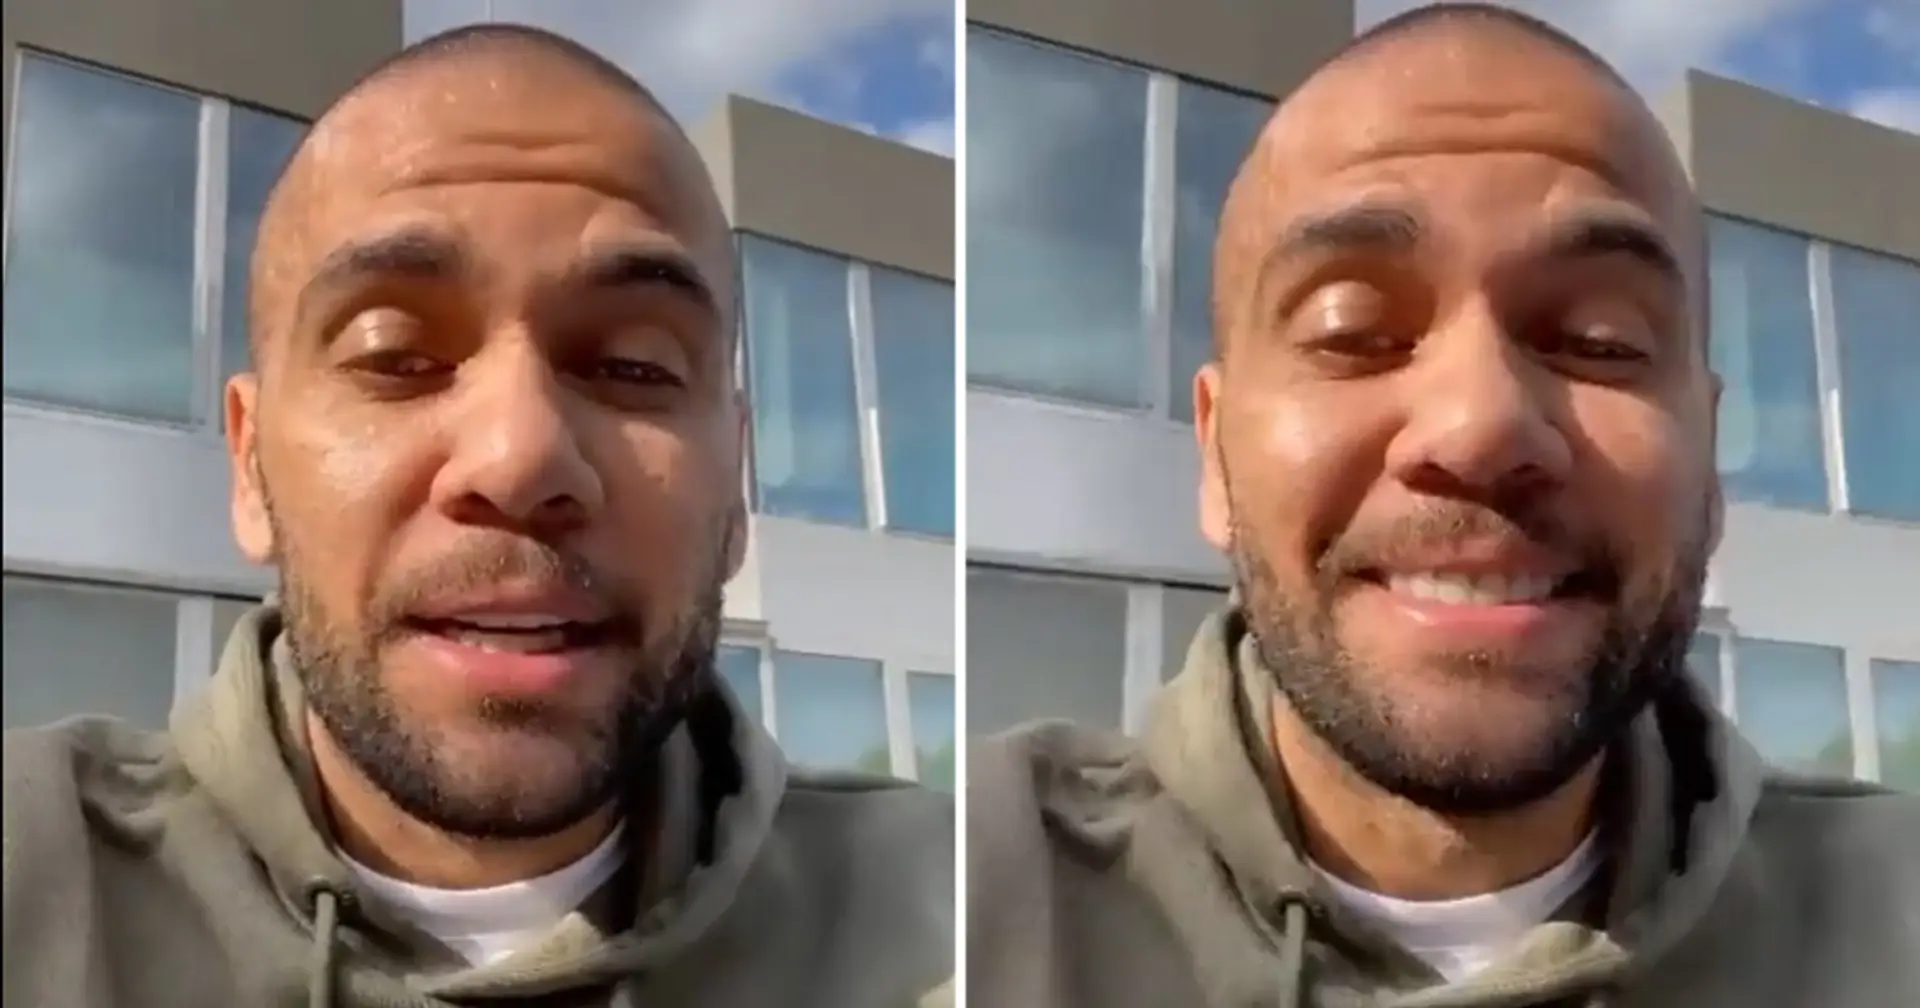 'Let's rebuild this team we all love': Dani Alves sends message to fans as he arrives in Barcelona